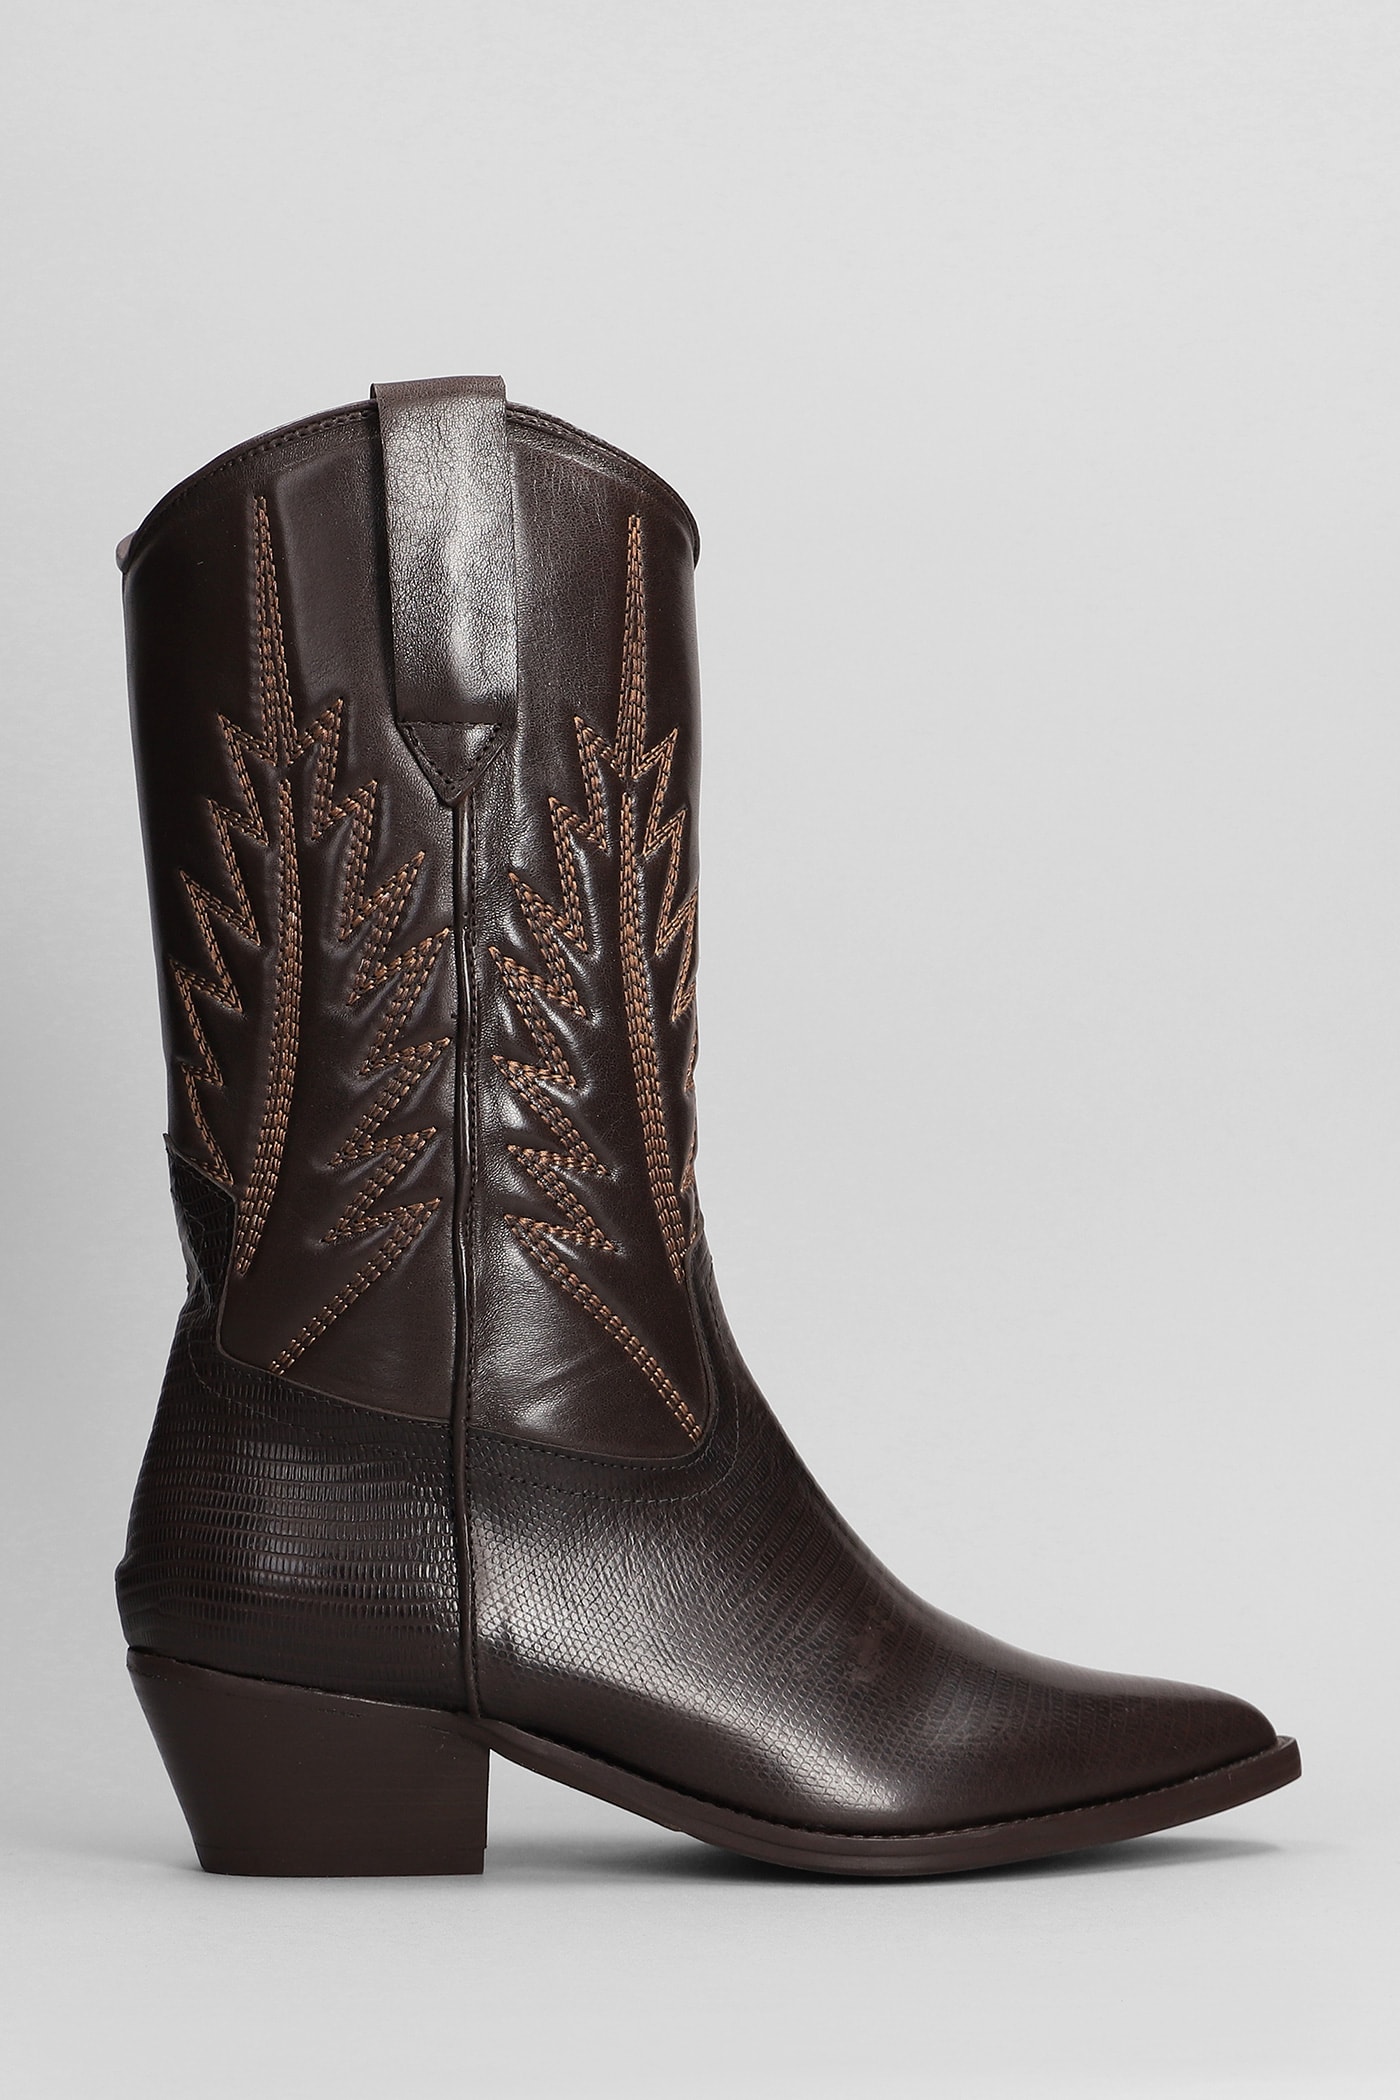 Texan Boots In Dark Brown Suede And Leather